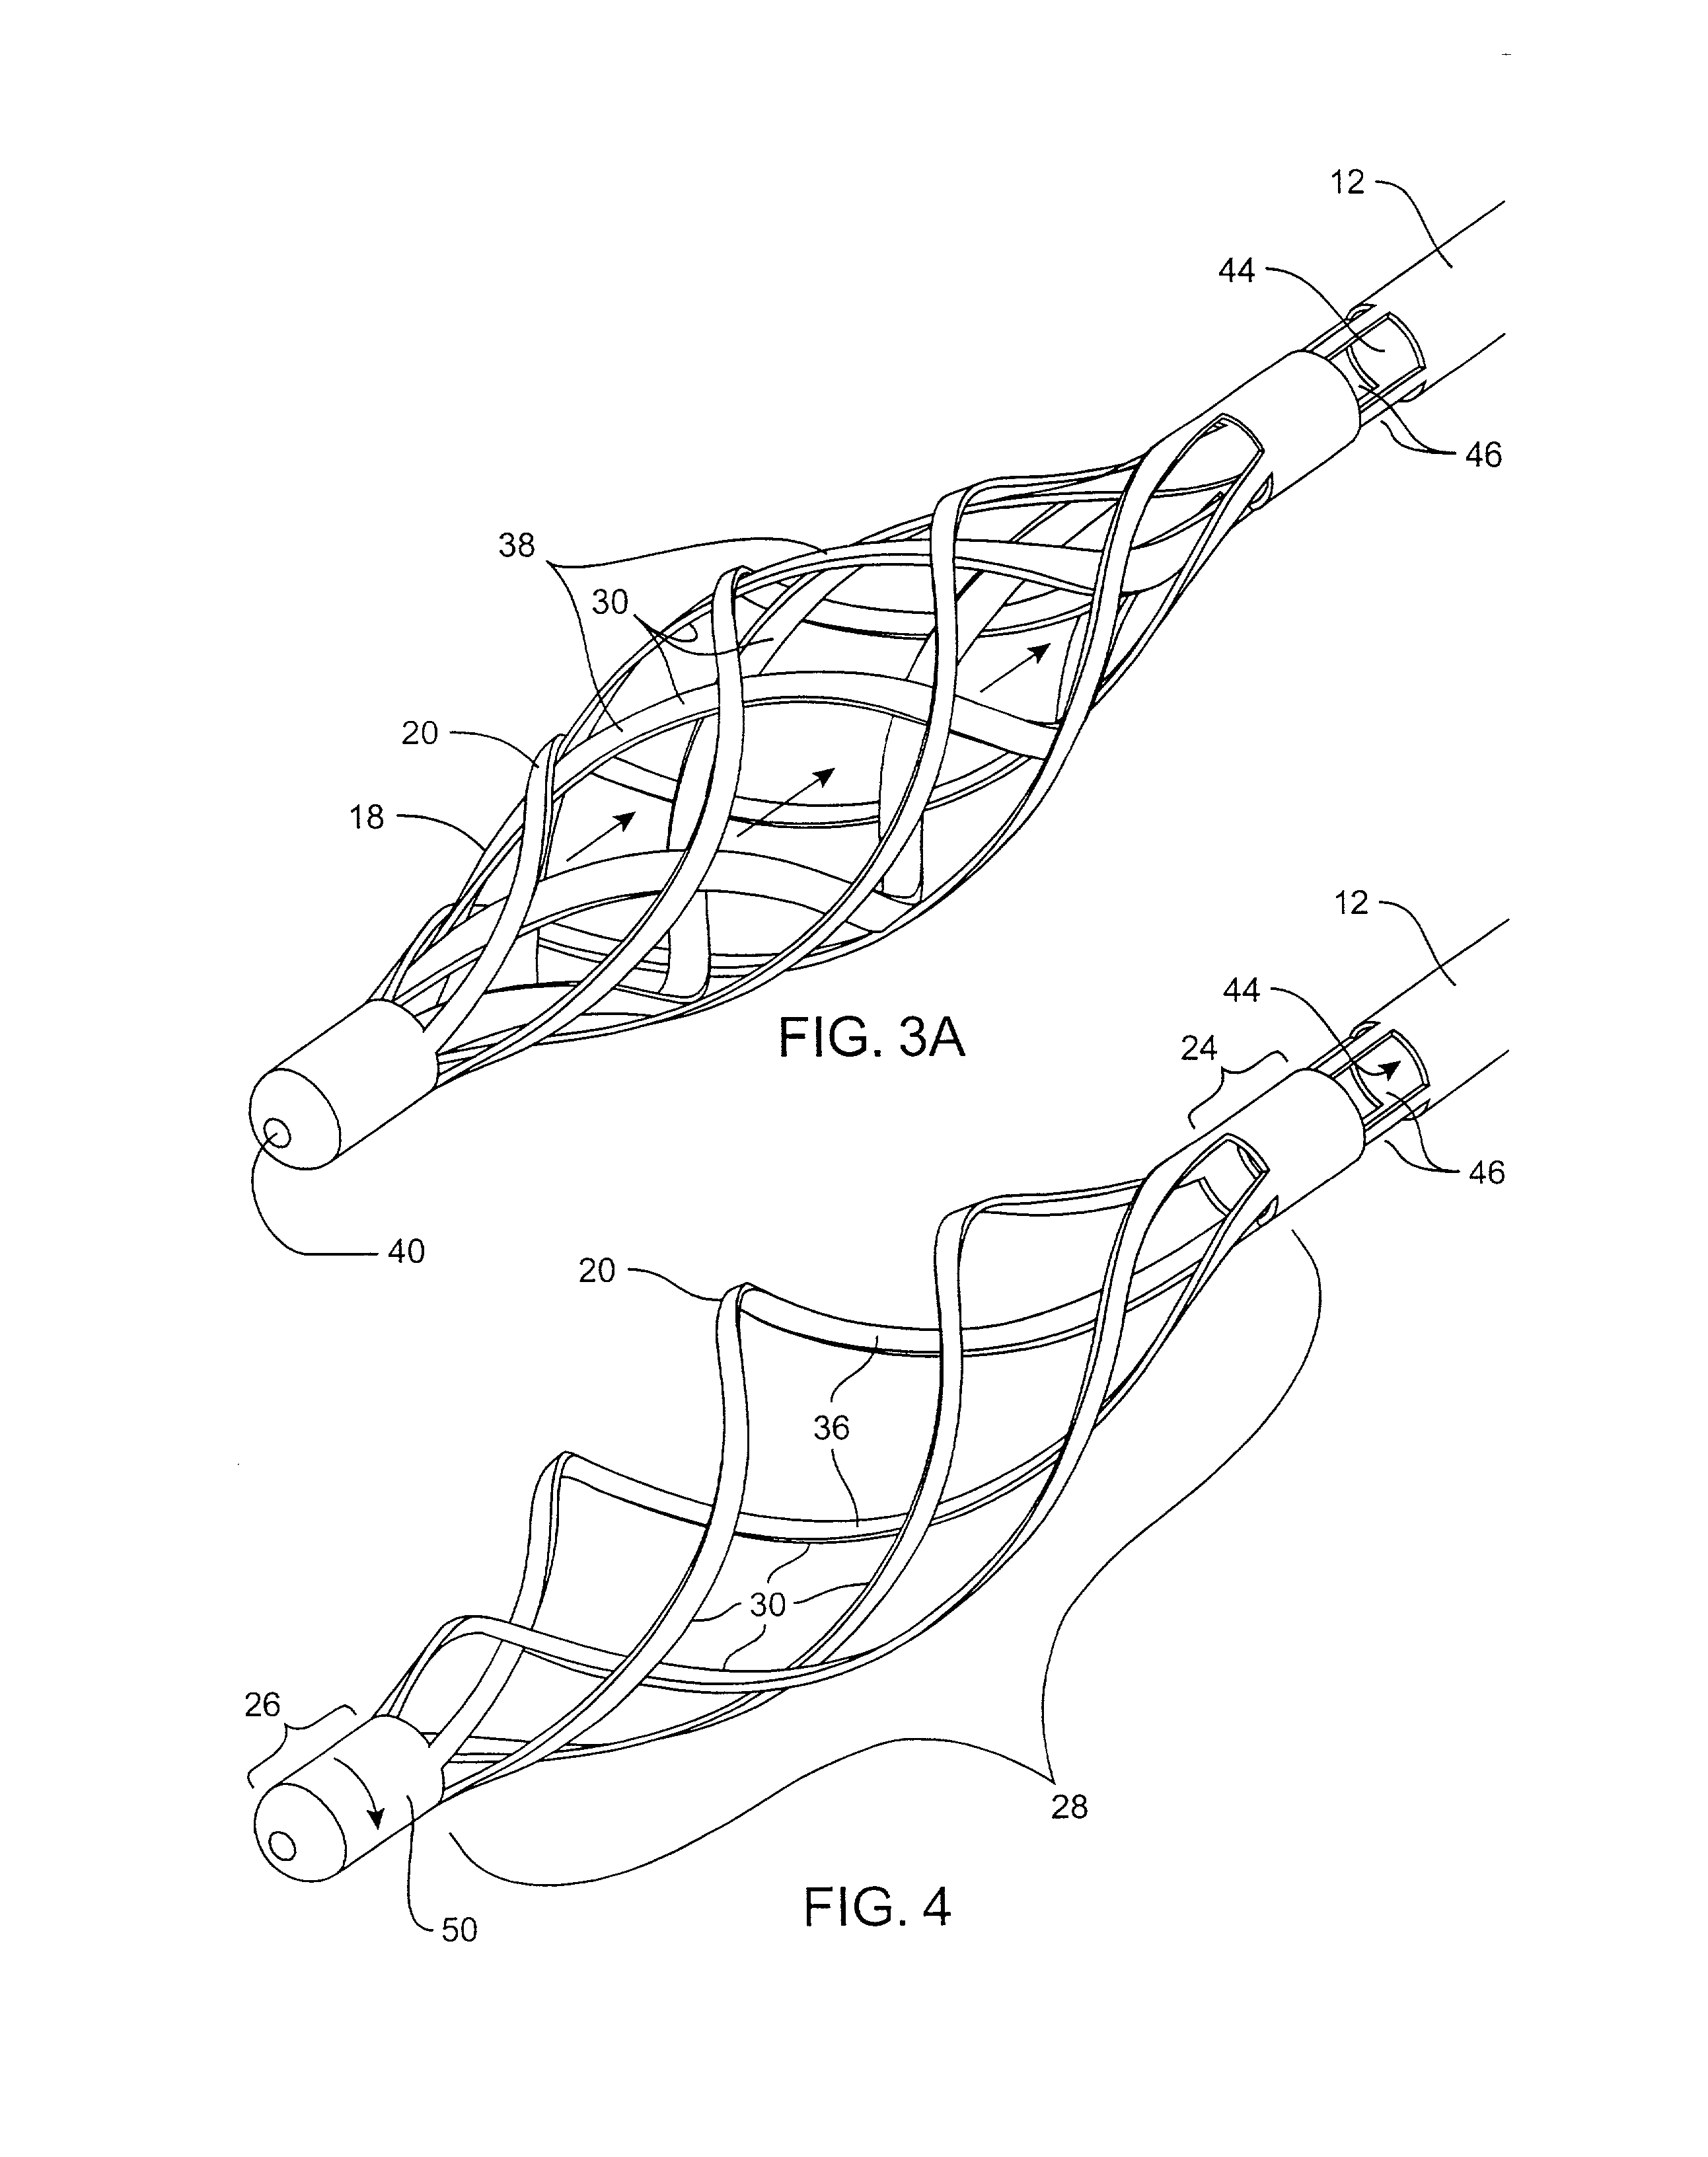 Method and device for locating guidewire and treating chronic total occlusions